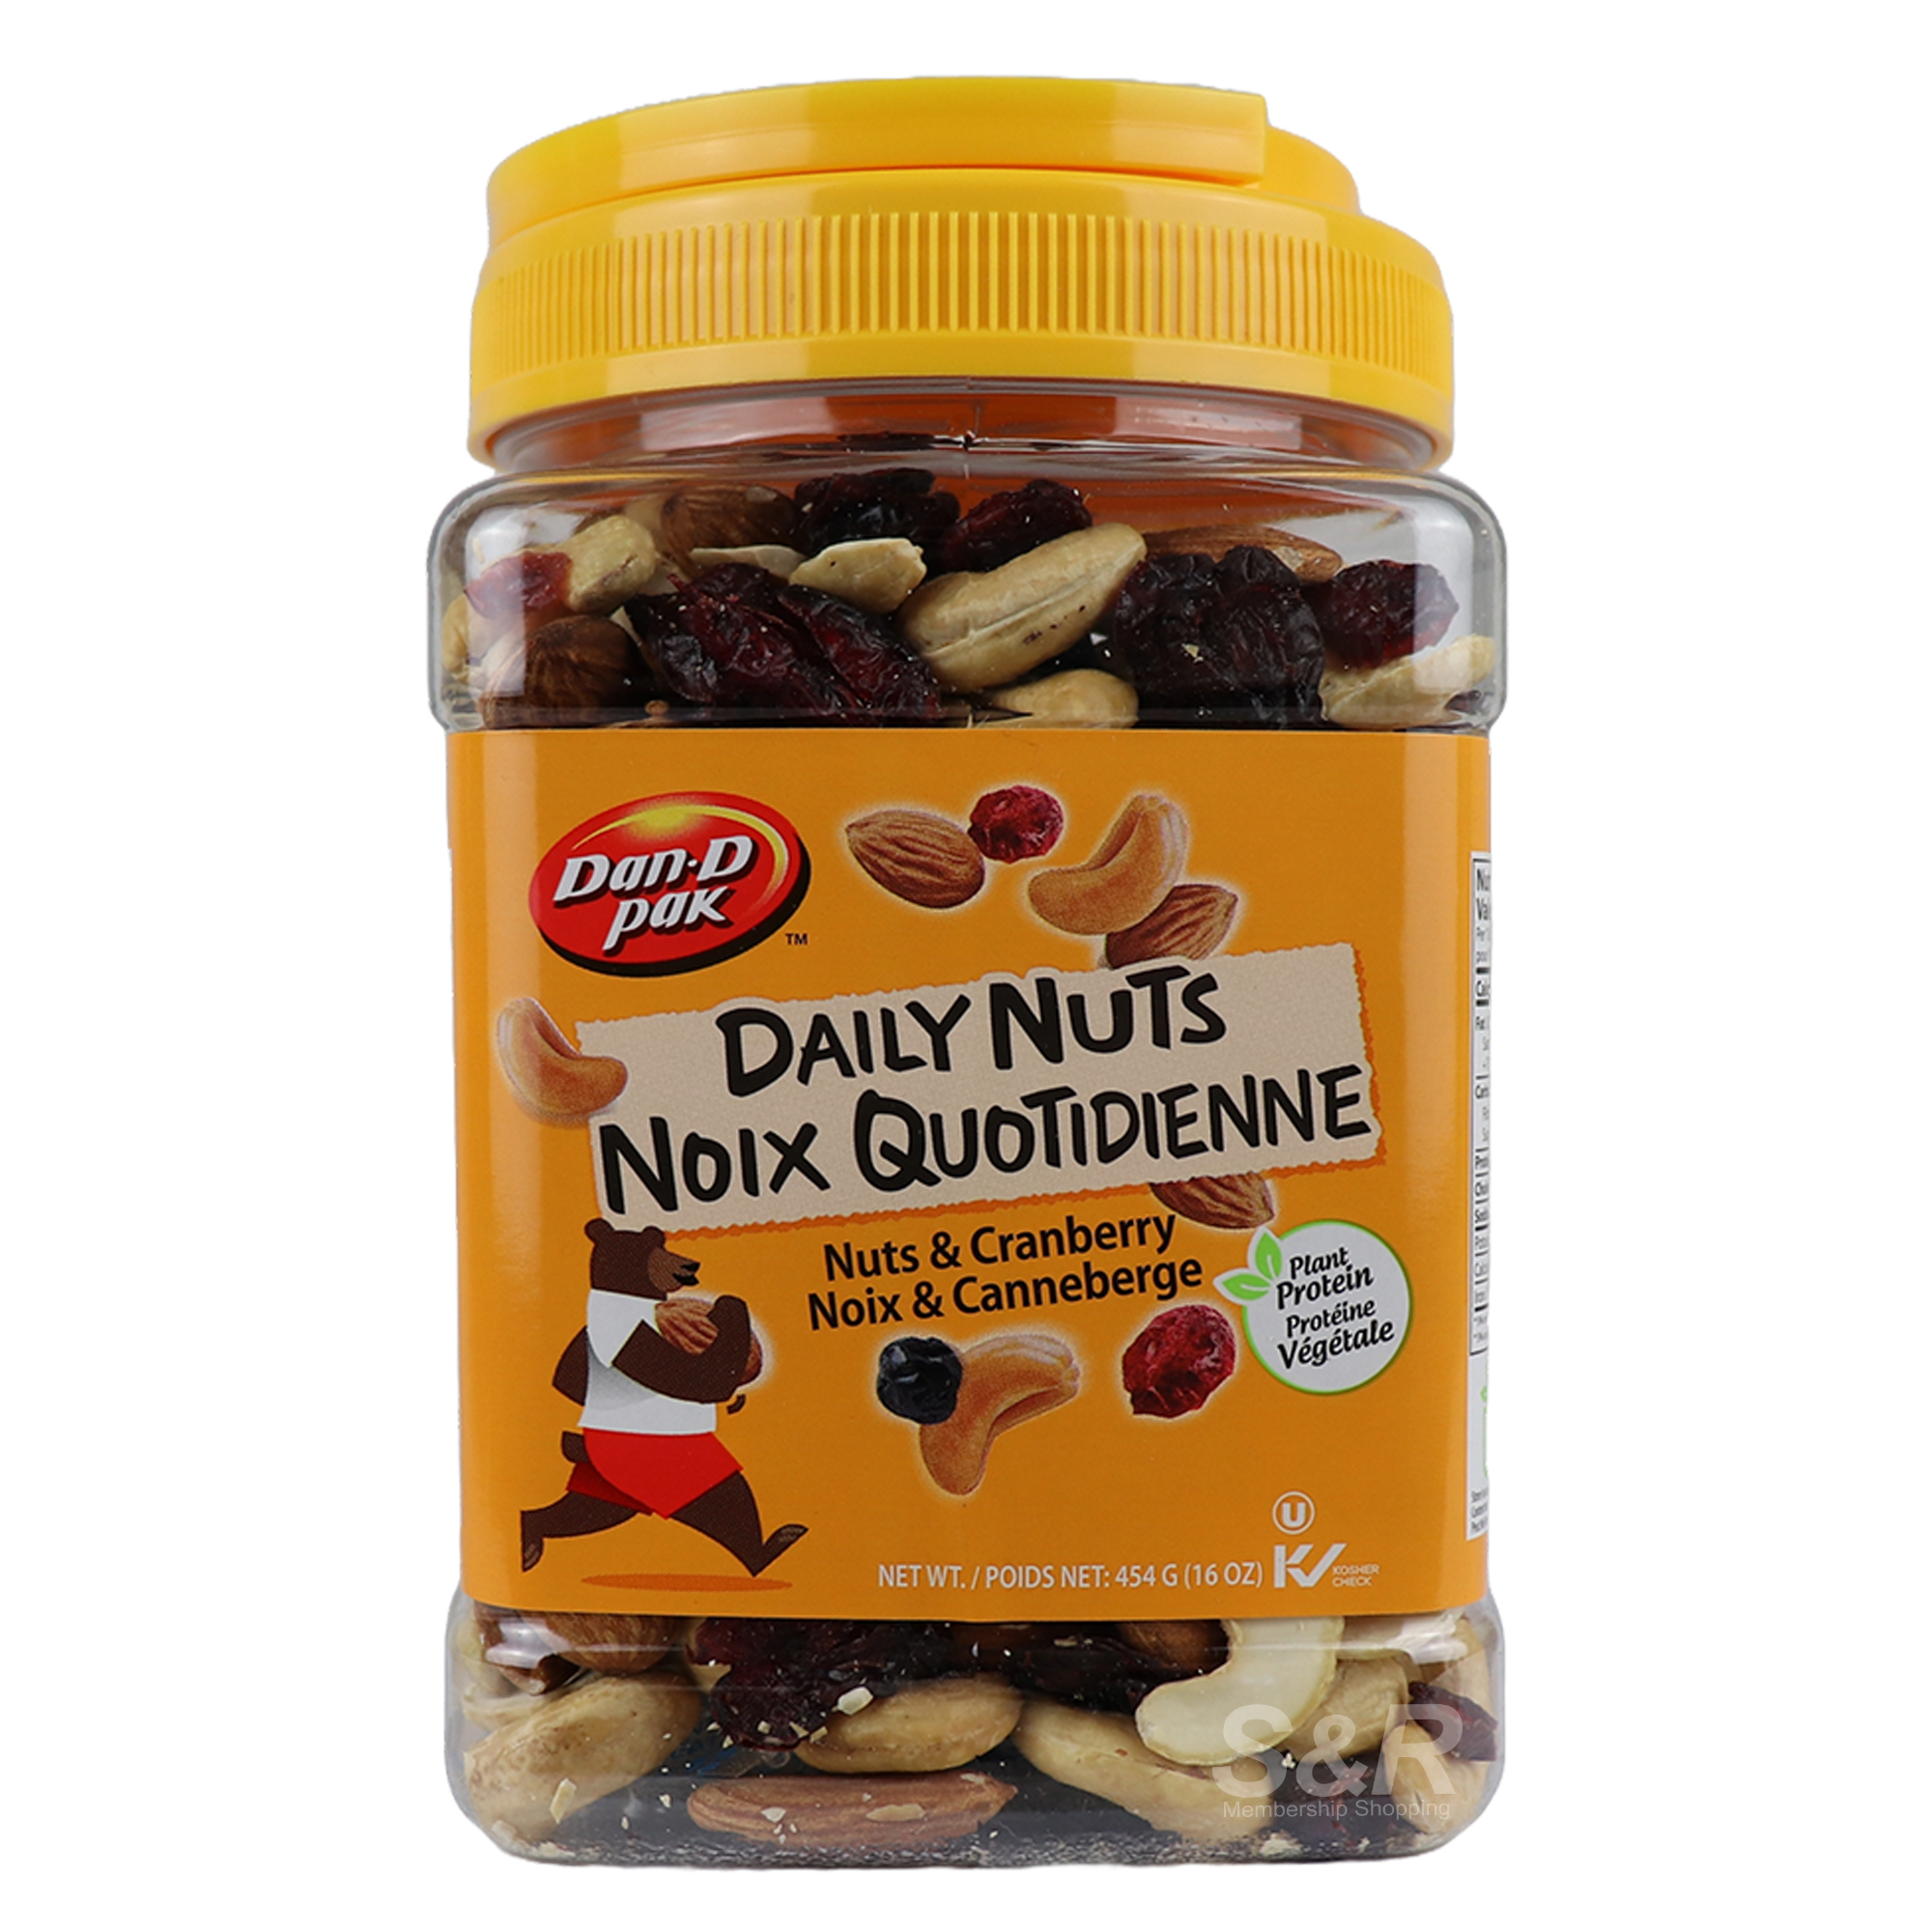 Dan-D Pak Daily Nuts and Cranberry 454g